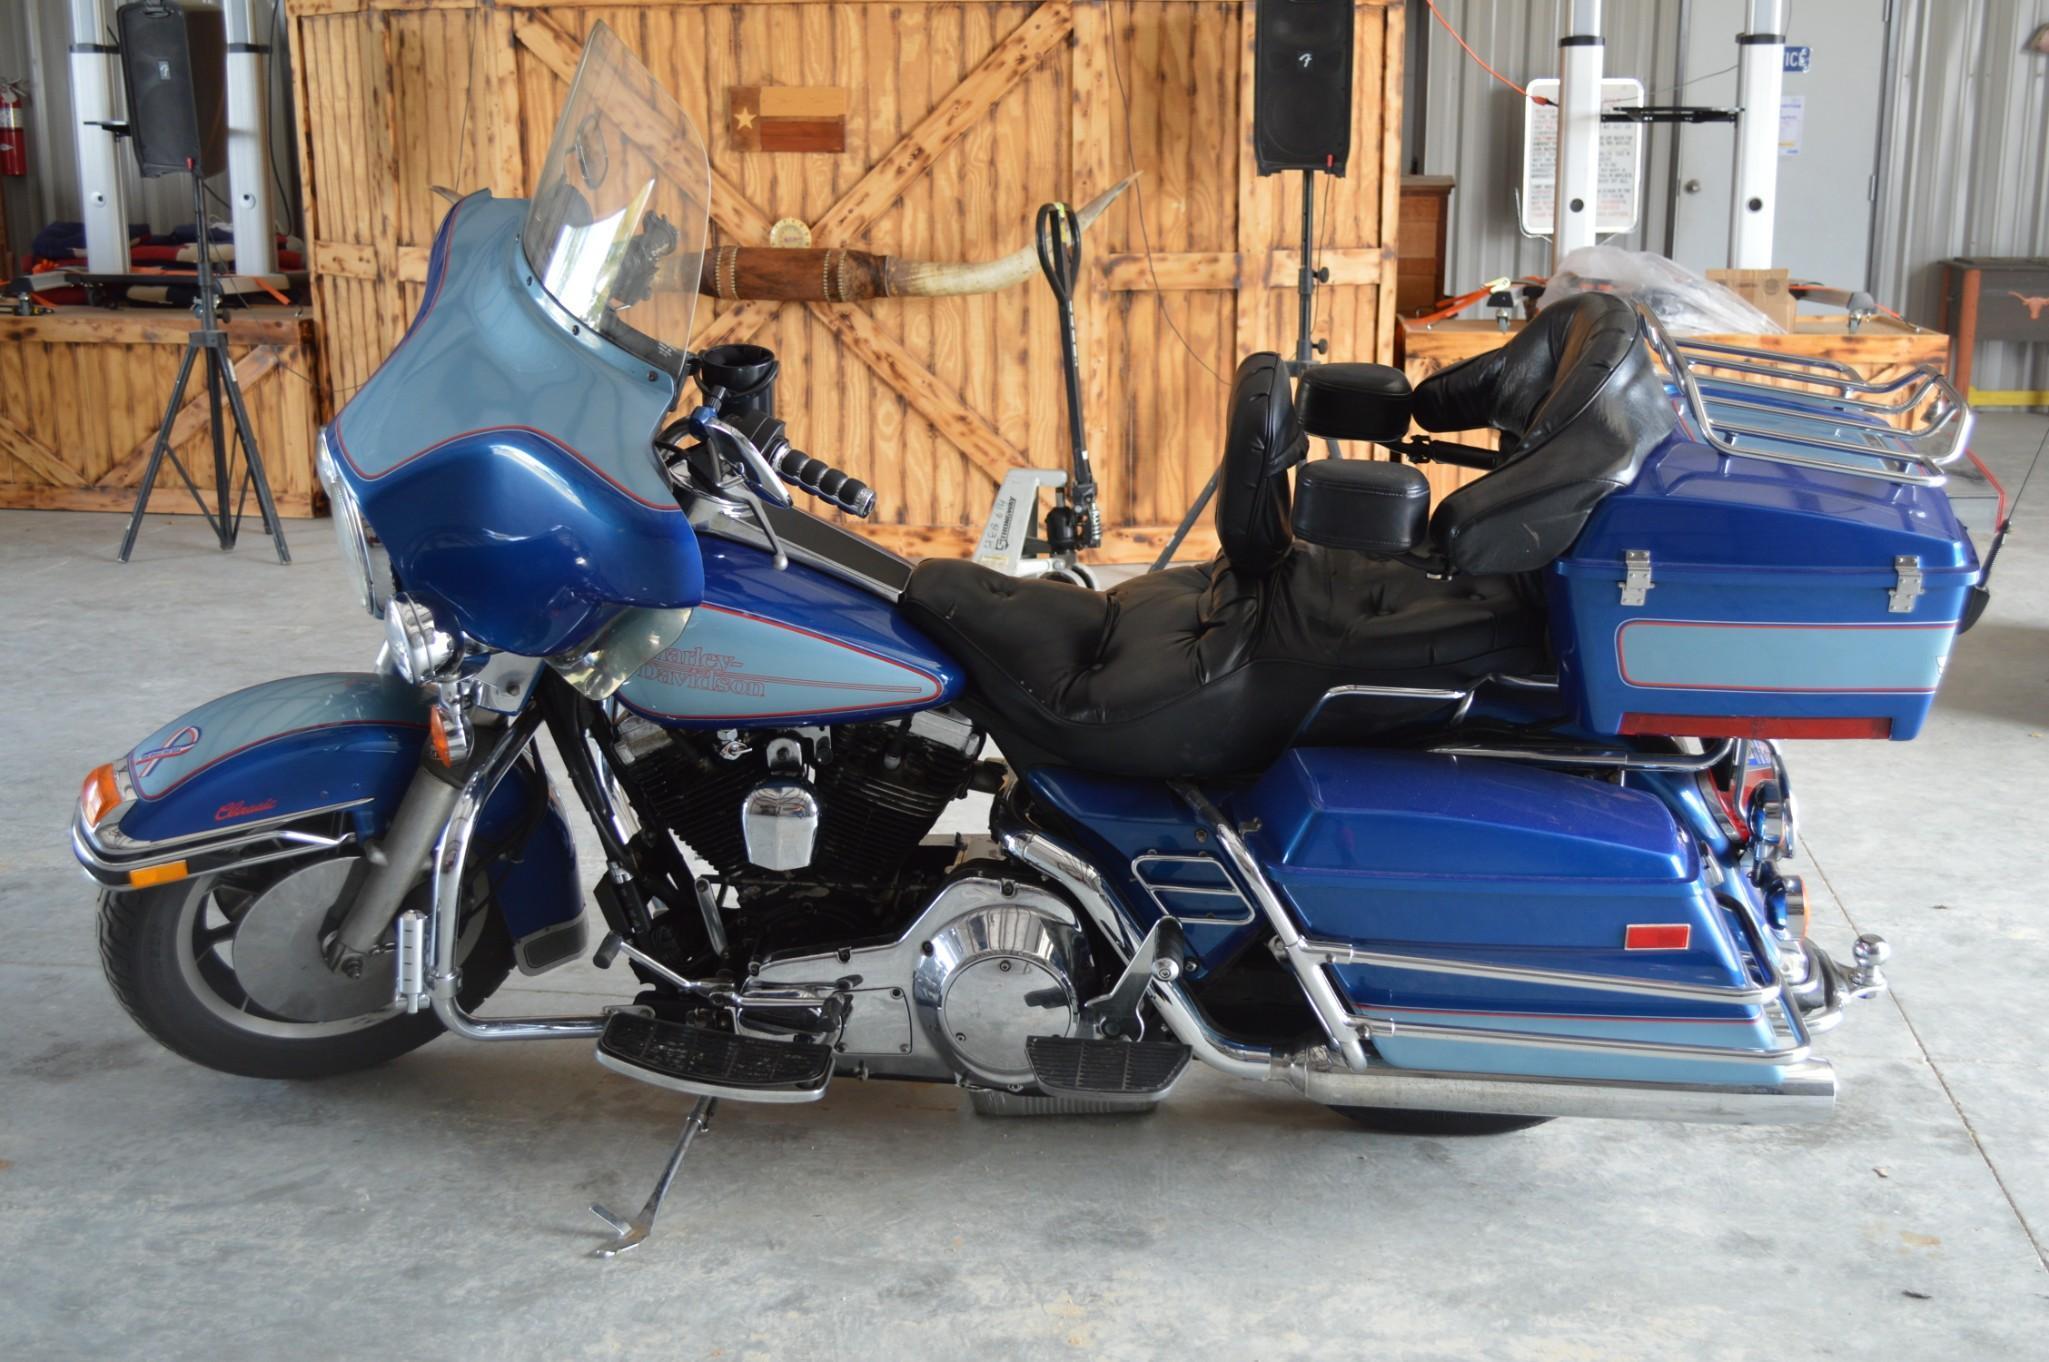 1989 Harley-Davidson FLHTC Electra Glide Classic Motorcycle